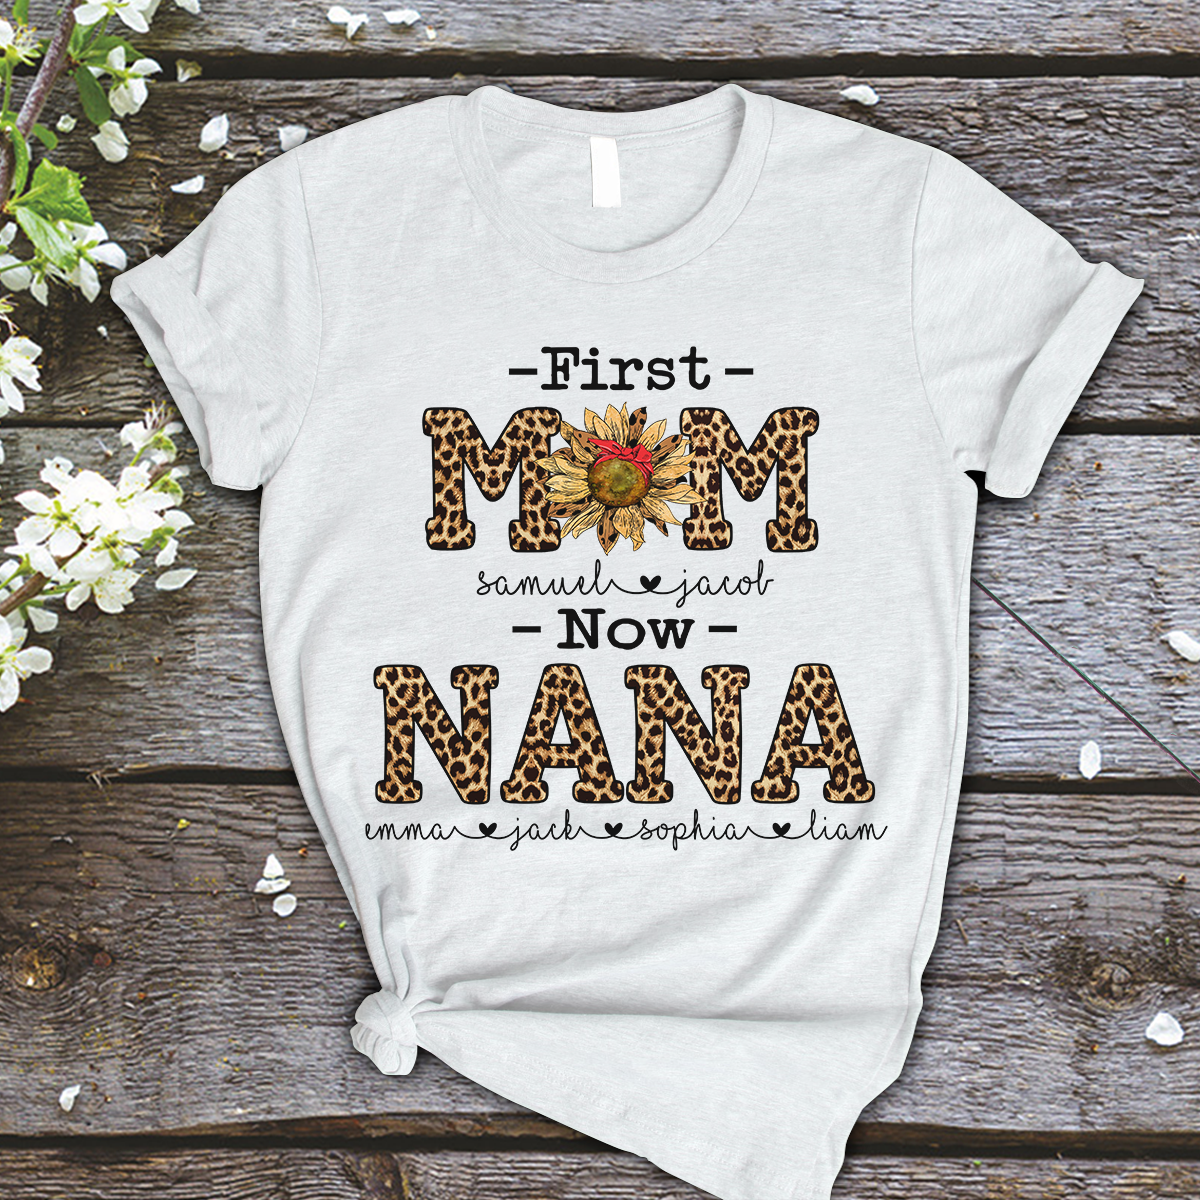 First Mom Now Nana Shirt, Personalized Grandma Shirts with Grankids Names, Mothers Day Gift, Grandma Shirt, New Grandma Shirt, Mama Shirt